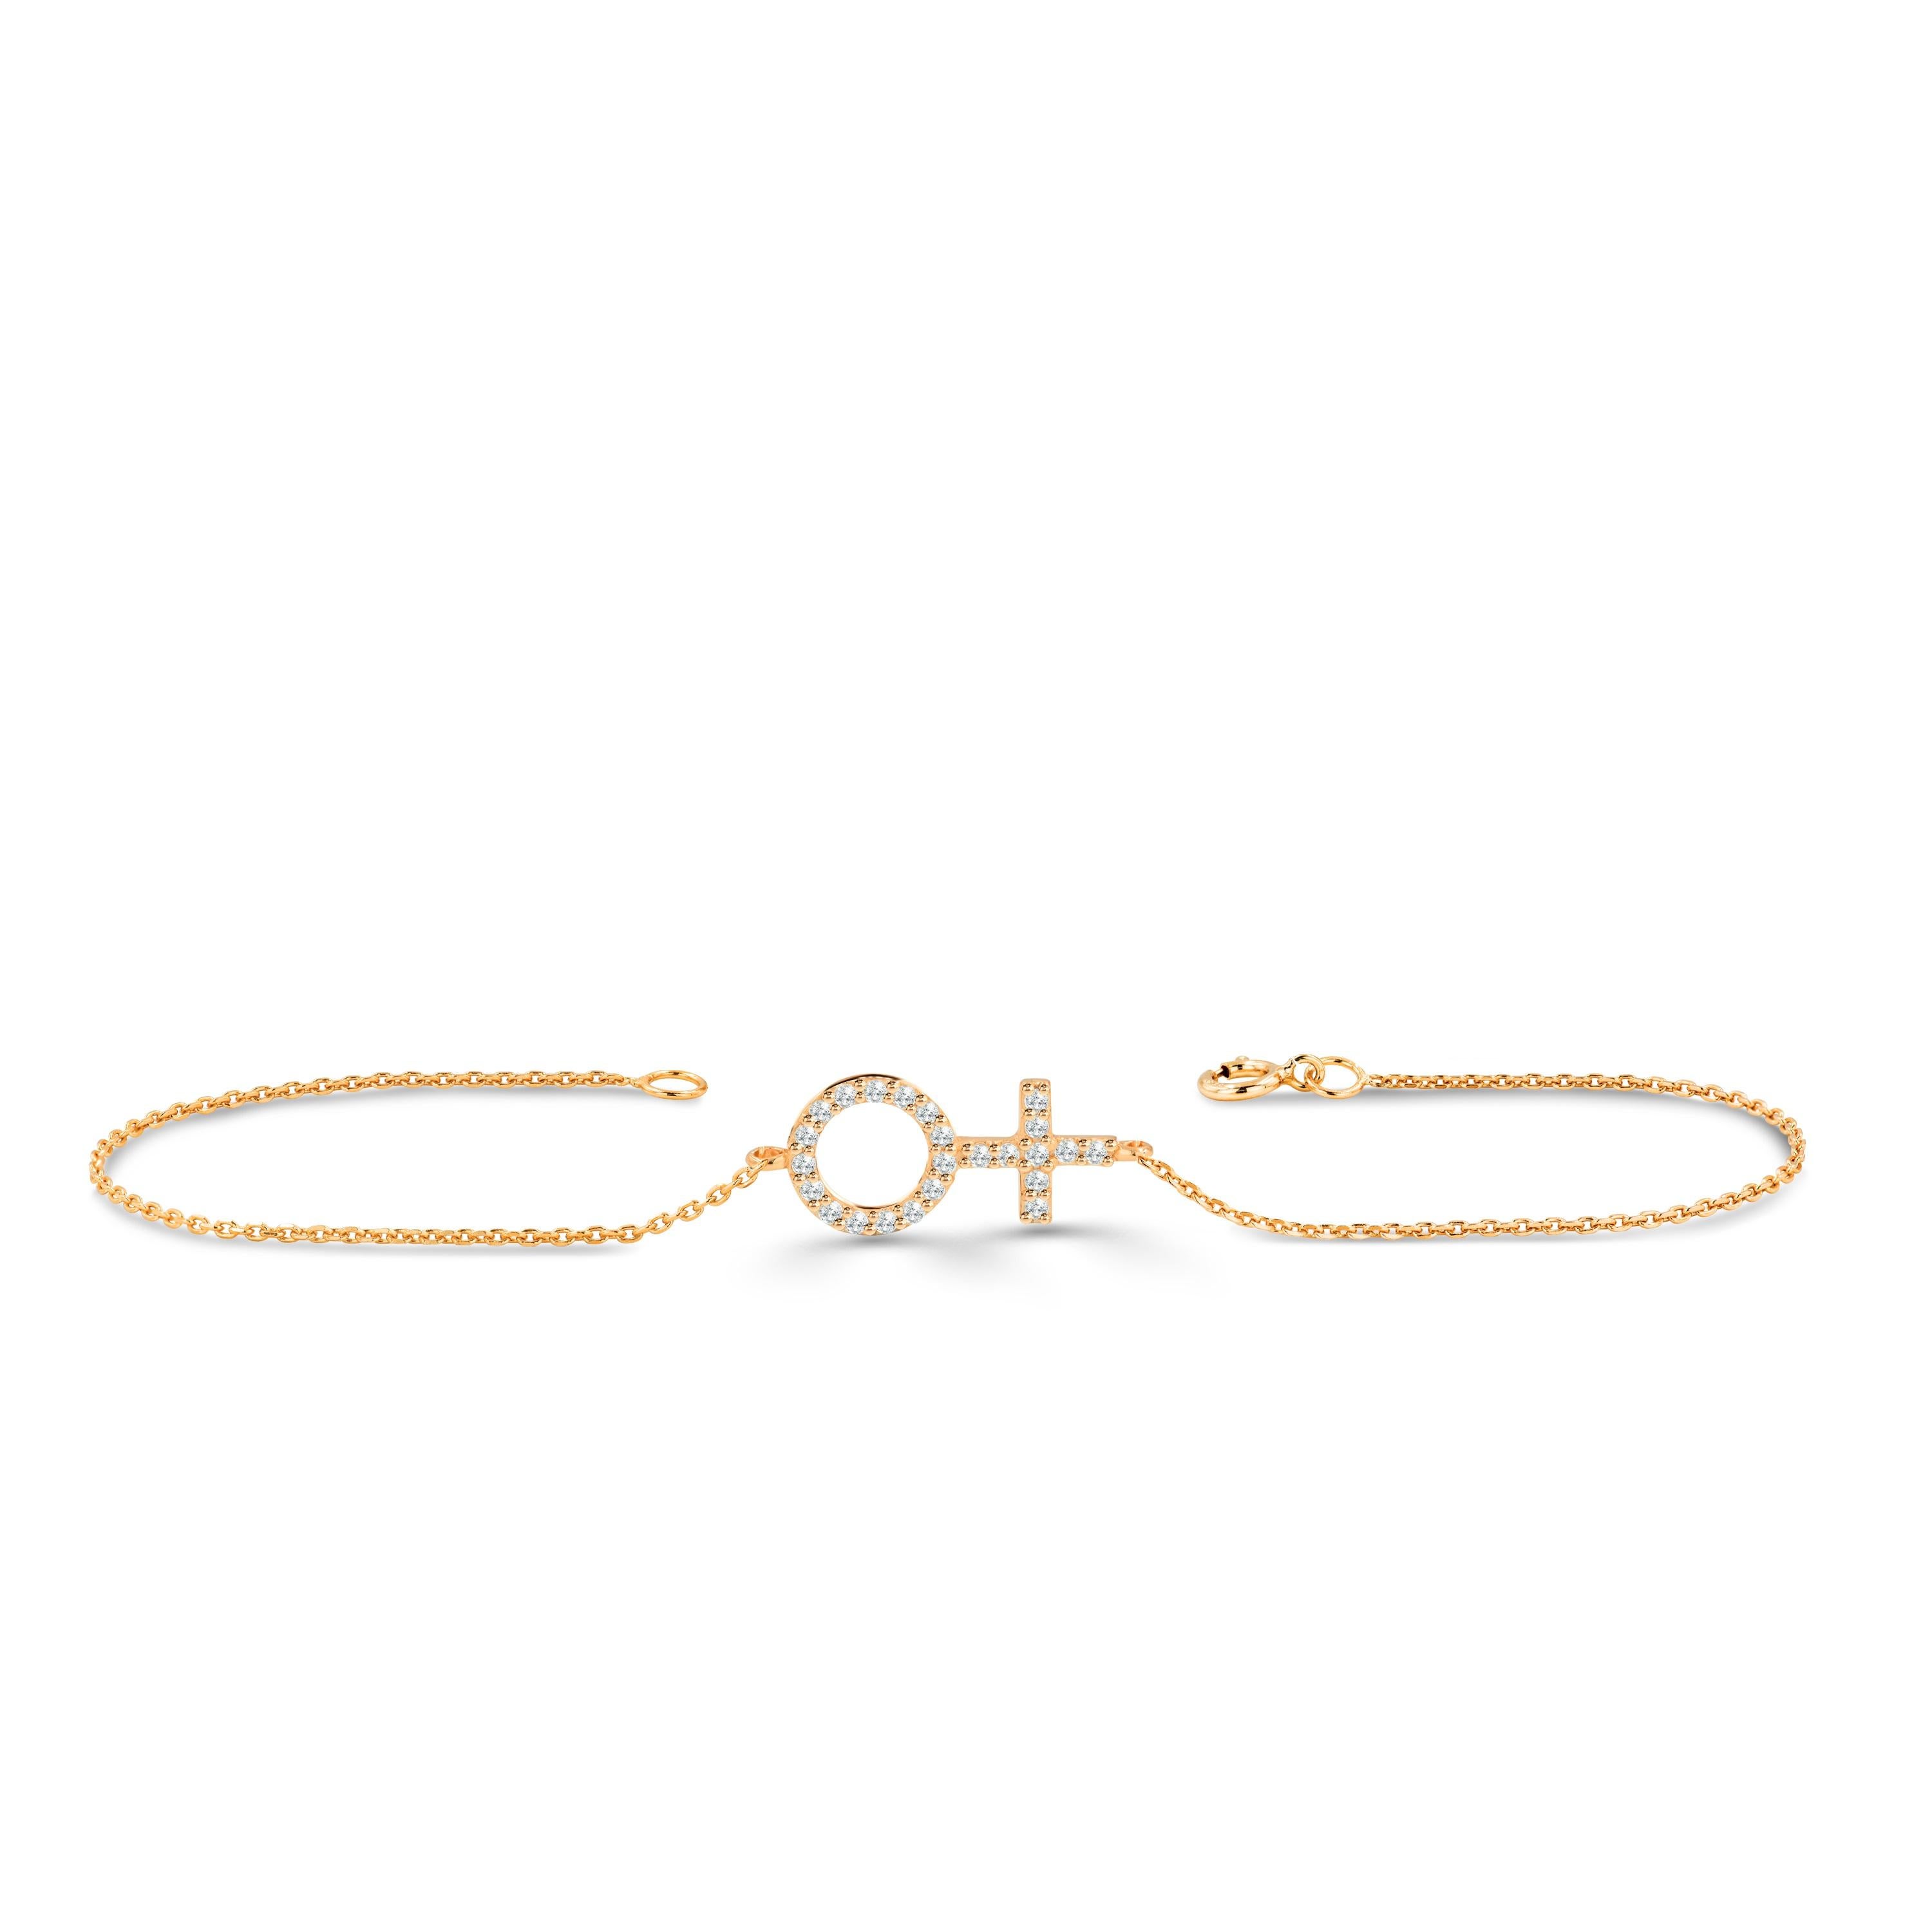 Beautiful and elegant, this female symbol bracelet is made with pure gold and consists of genuine and natural diamonds. The diamonds are hand selected by me to ensure quality. This bracelet is carefully handcrafted by our artisans with love made in